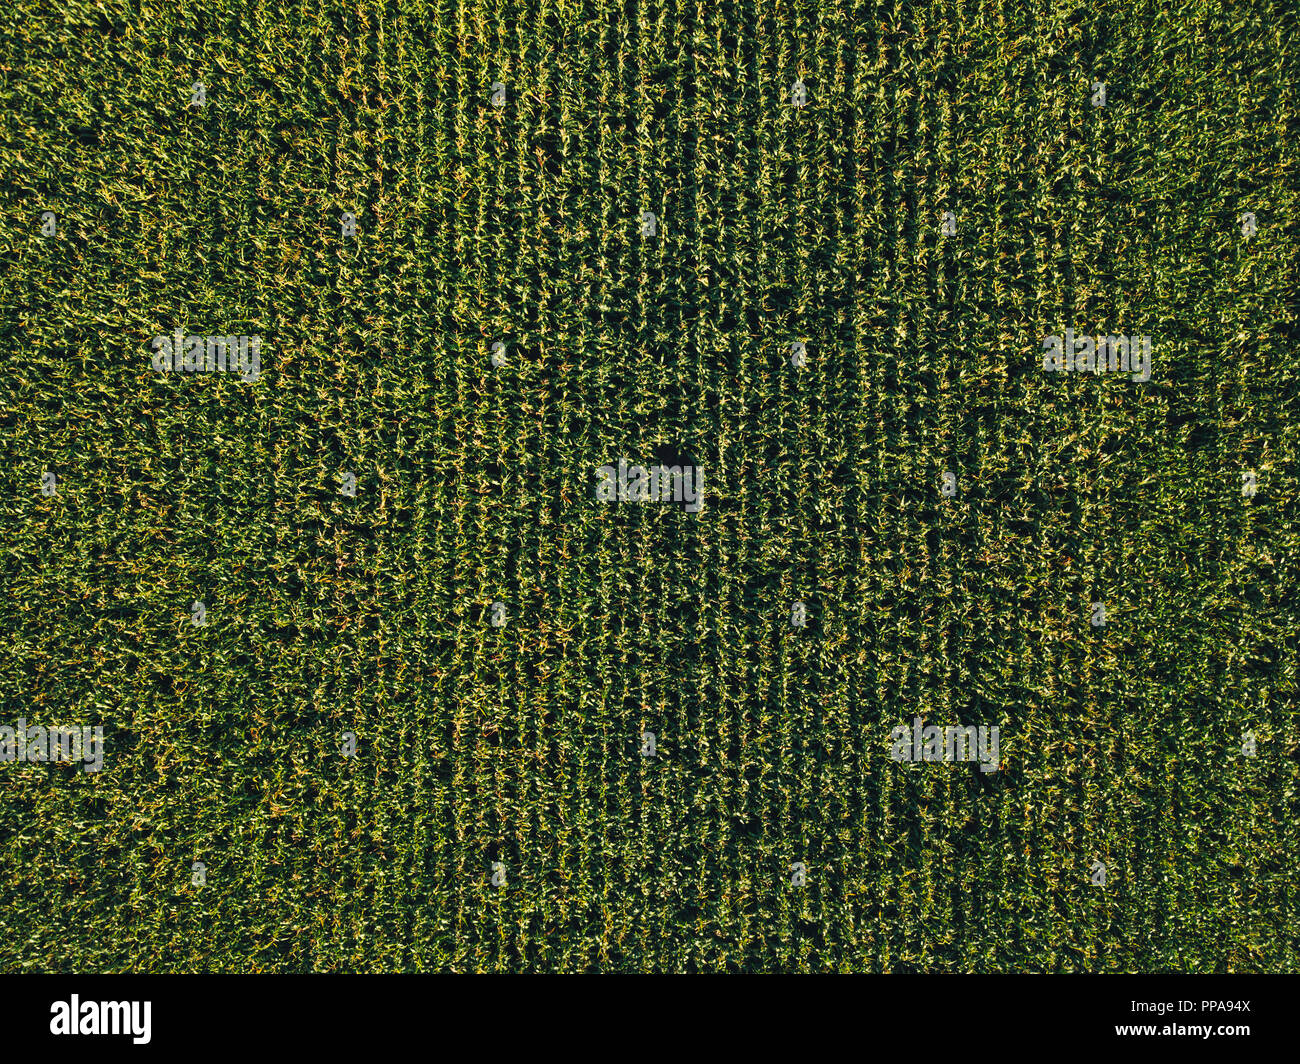 Aerial view of cultivated sweetcorn plantation, top view from drone pov Stock Photo